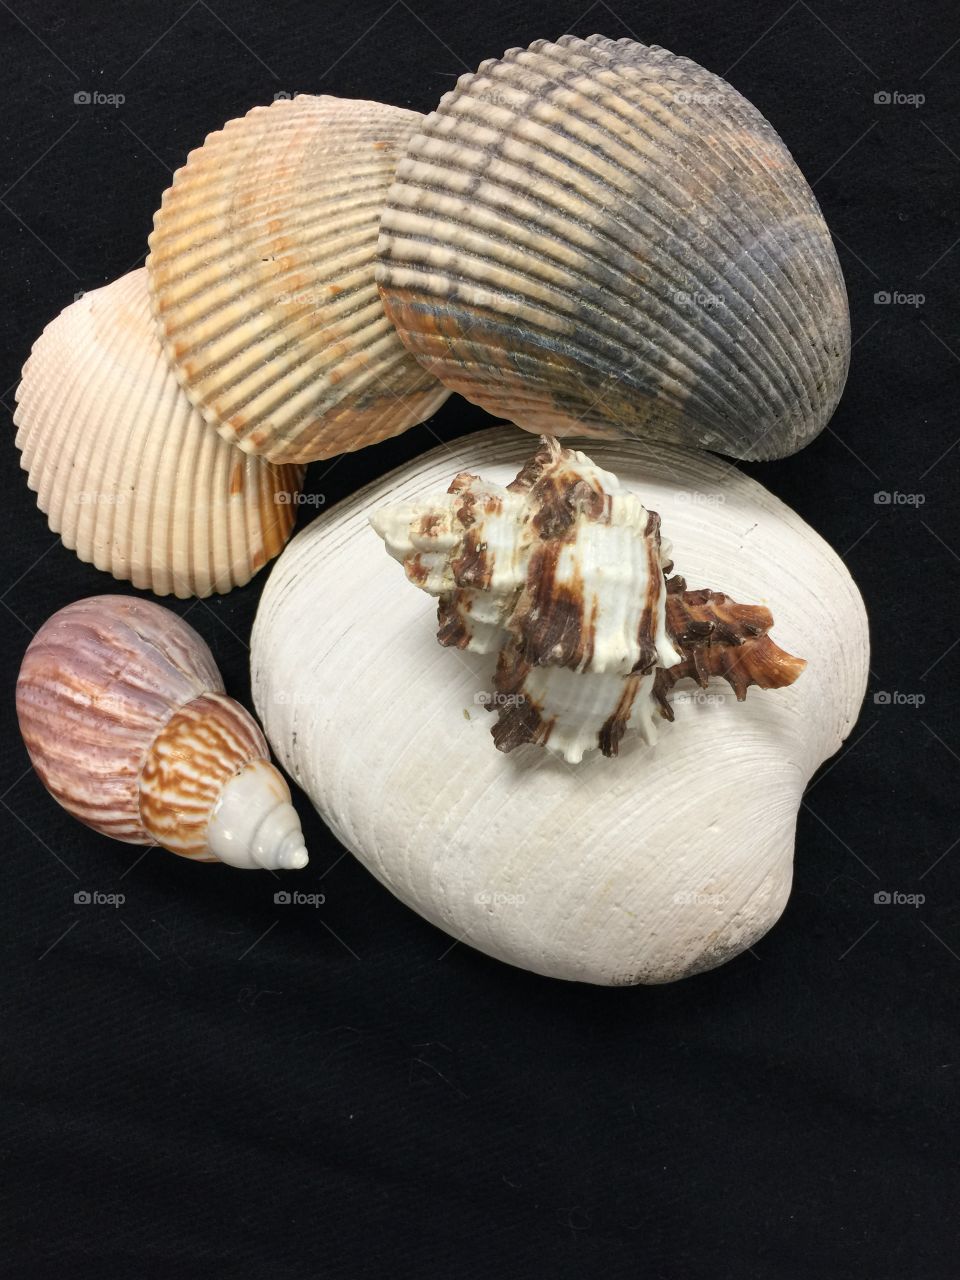 A stack of some shells